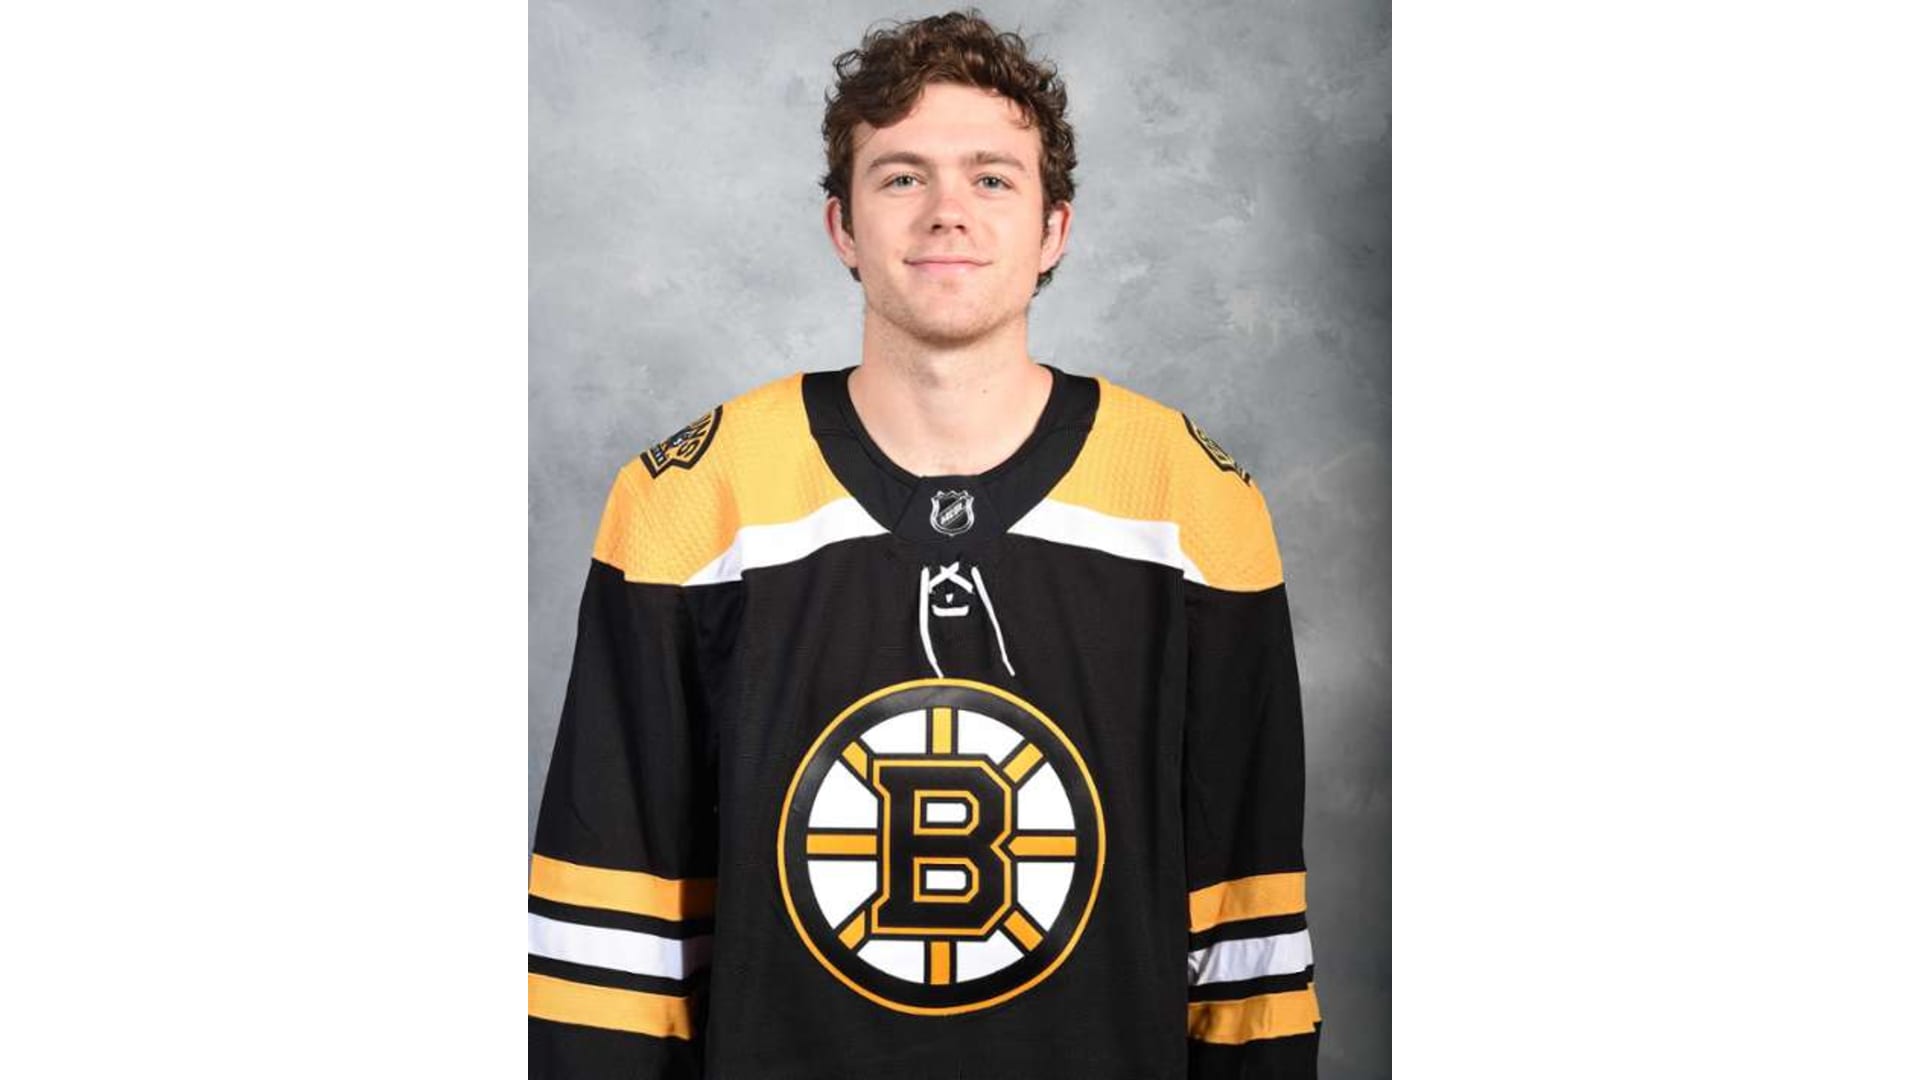 Boston Bruins: 3 young players to watch this season